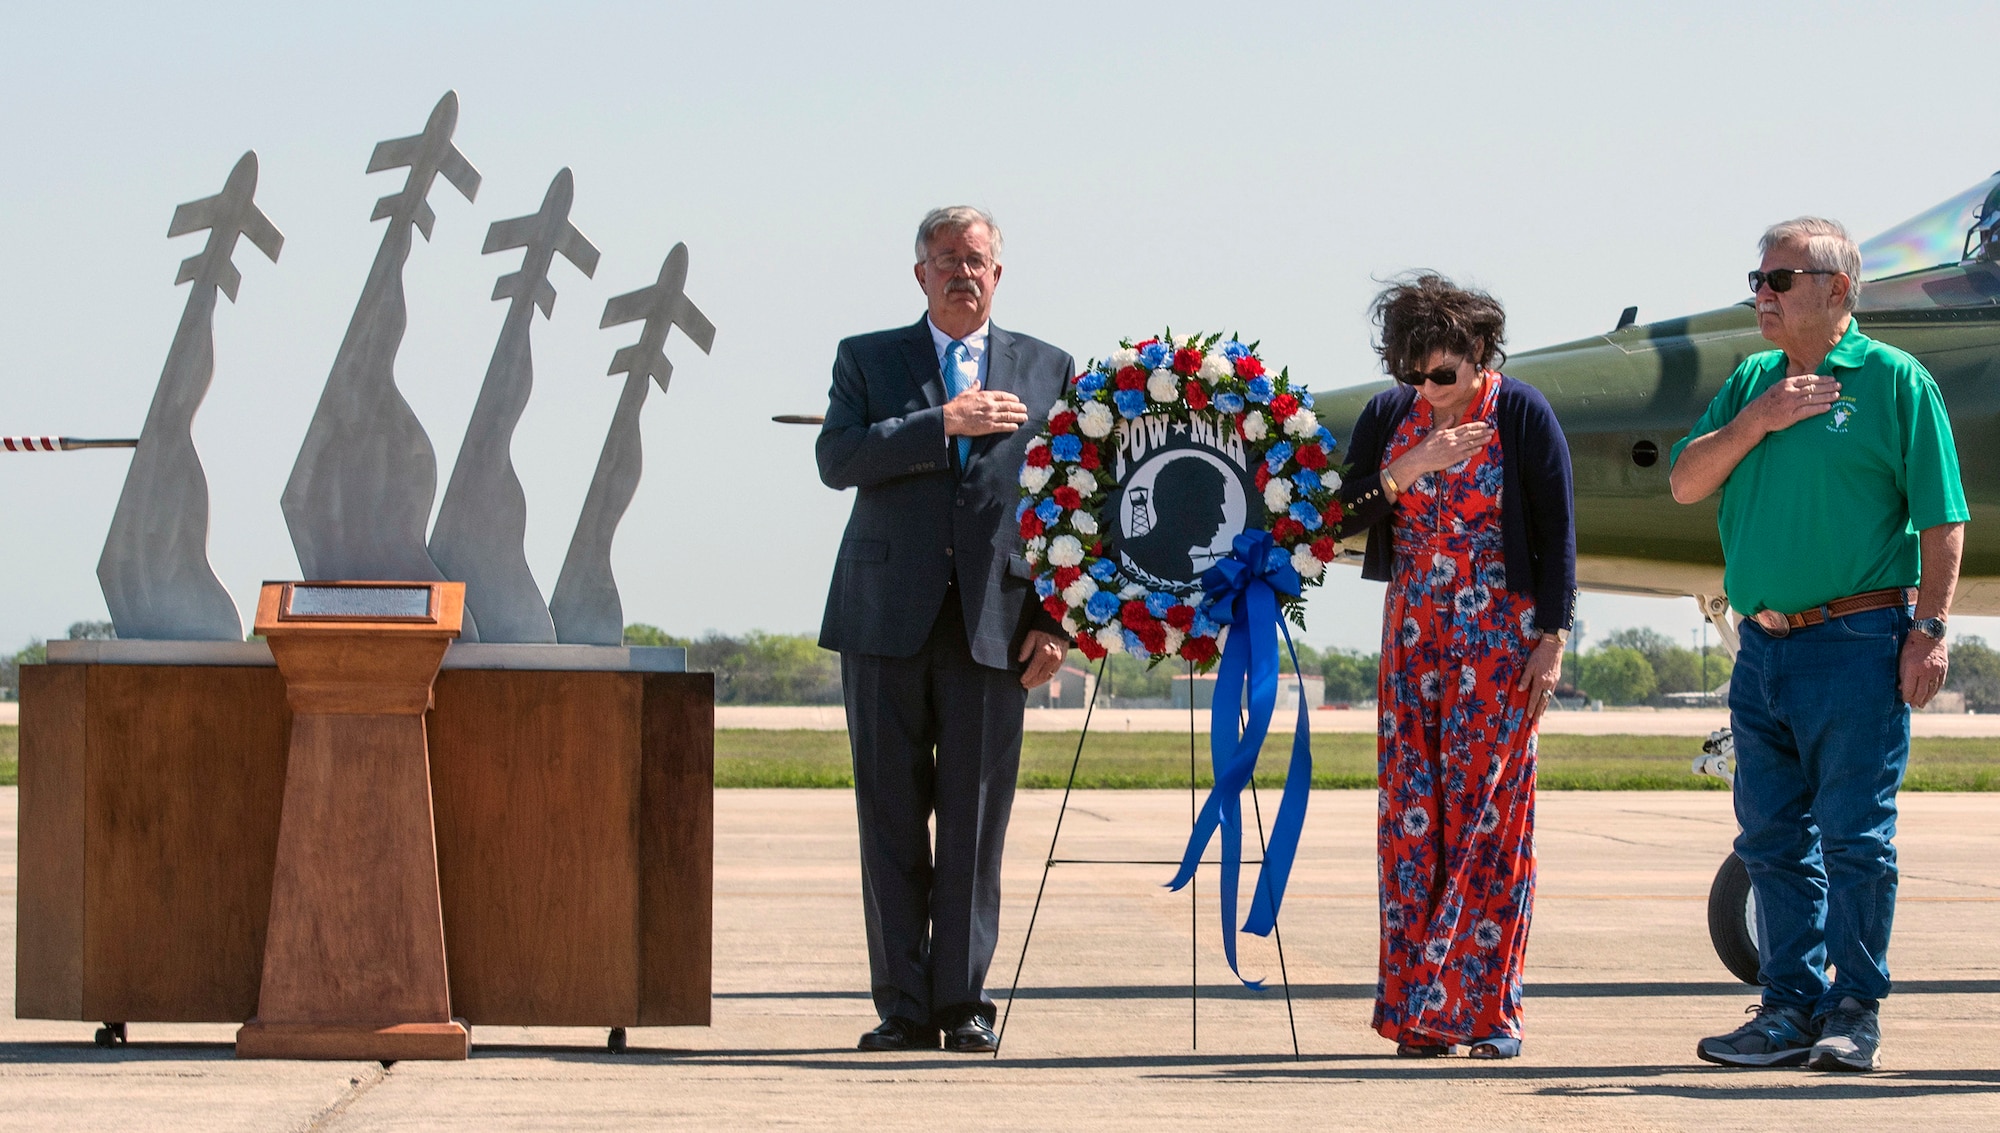 Former prisoners of war retired Capt. Gregg Hanson (left) and retired Maj. Richard Bates (right) are joined by Janine Sijan in a moment of silence to honor prisoners of war during the Freedom Flyers wreath-laying ceremony at Joint Base San Antonio-Randolph March 26. Janine is the sister of Capt. Lance P. Sijan, a Medal of Honor recipient who lost his life as a POW in Vietnam. The 560th Flying Training Squadron holds the annual Freedom Flyers Reunion, which gives prisoners of war a chance to take their final flights and honor those who are unable to. This year was the 47th Freedom Flyers Reunion.